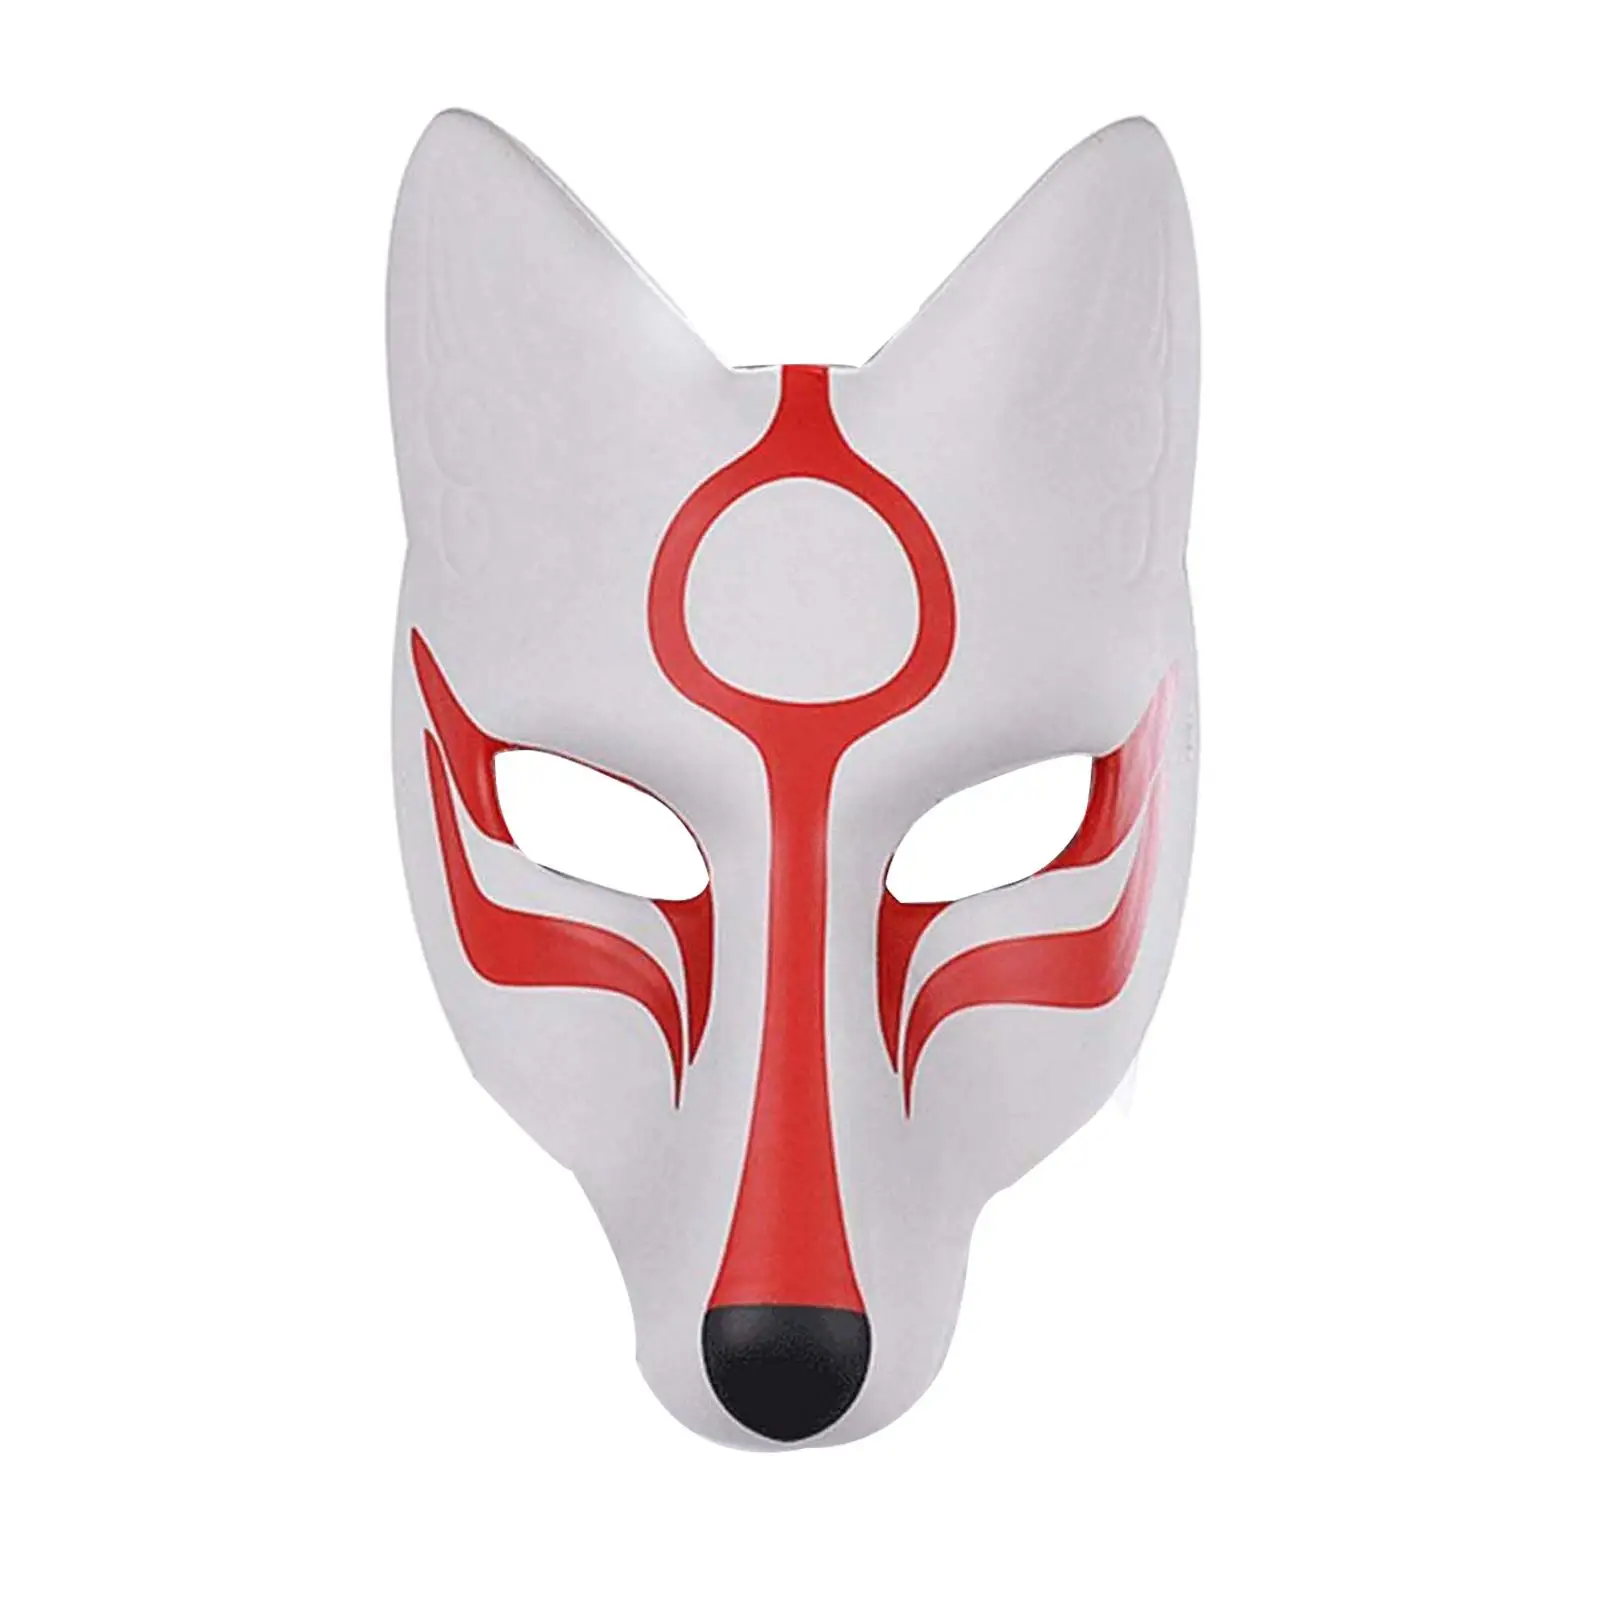 Japanese Anime Masks Halloween Cosplay Mask Mysterious Comfortable wearing